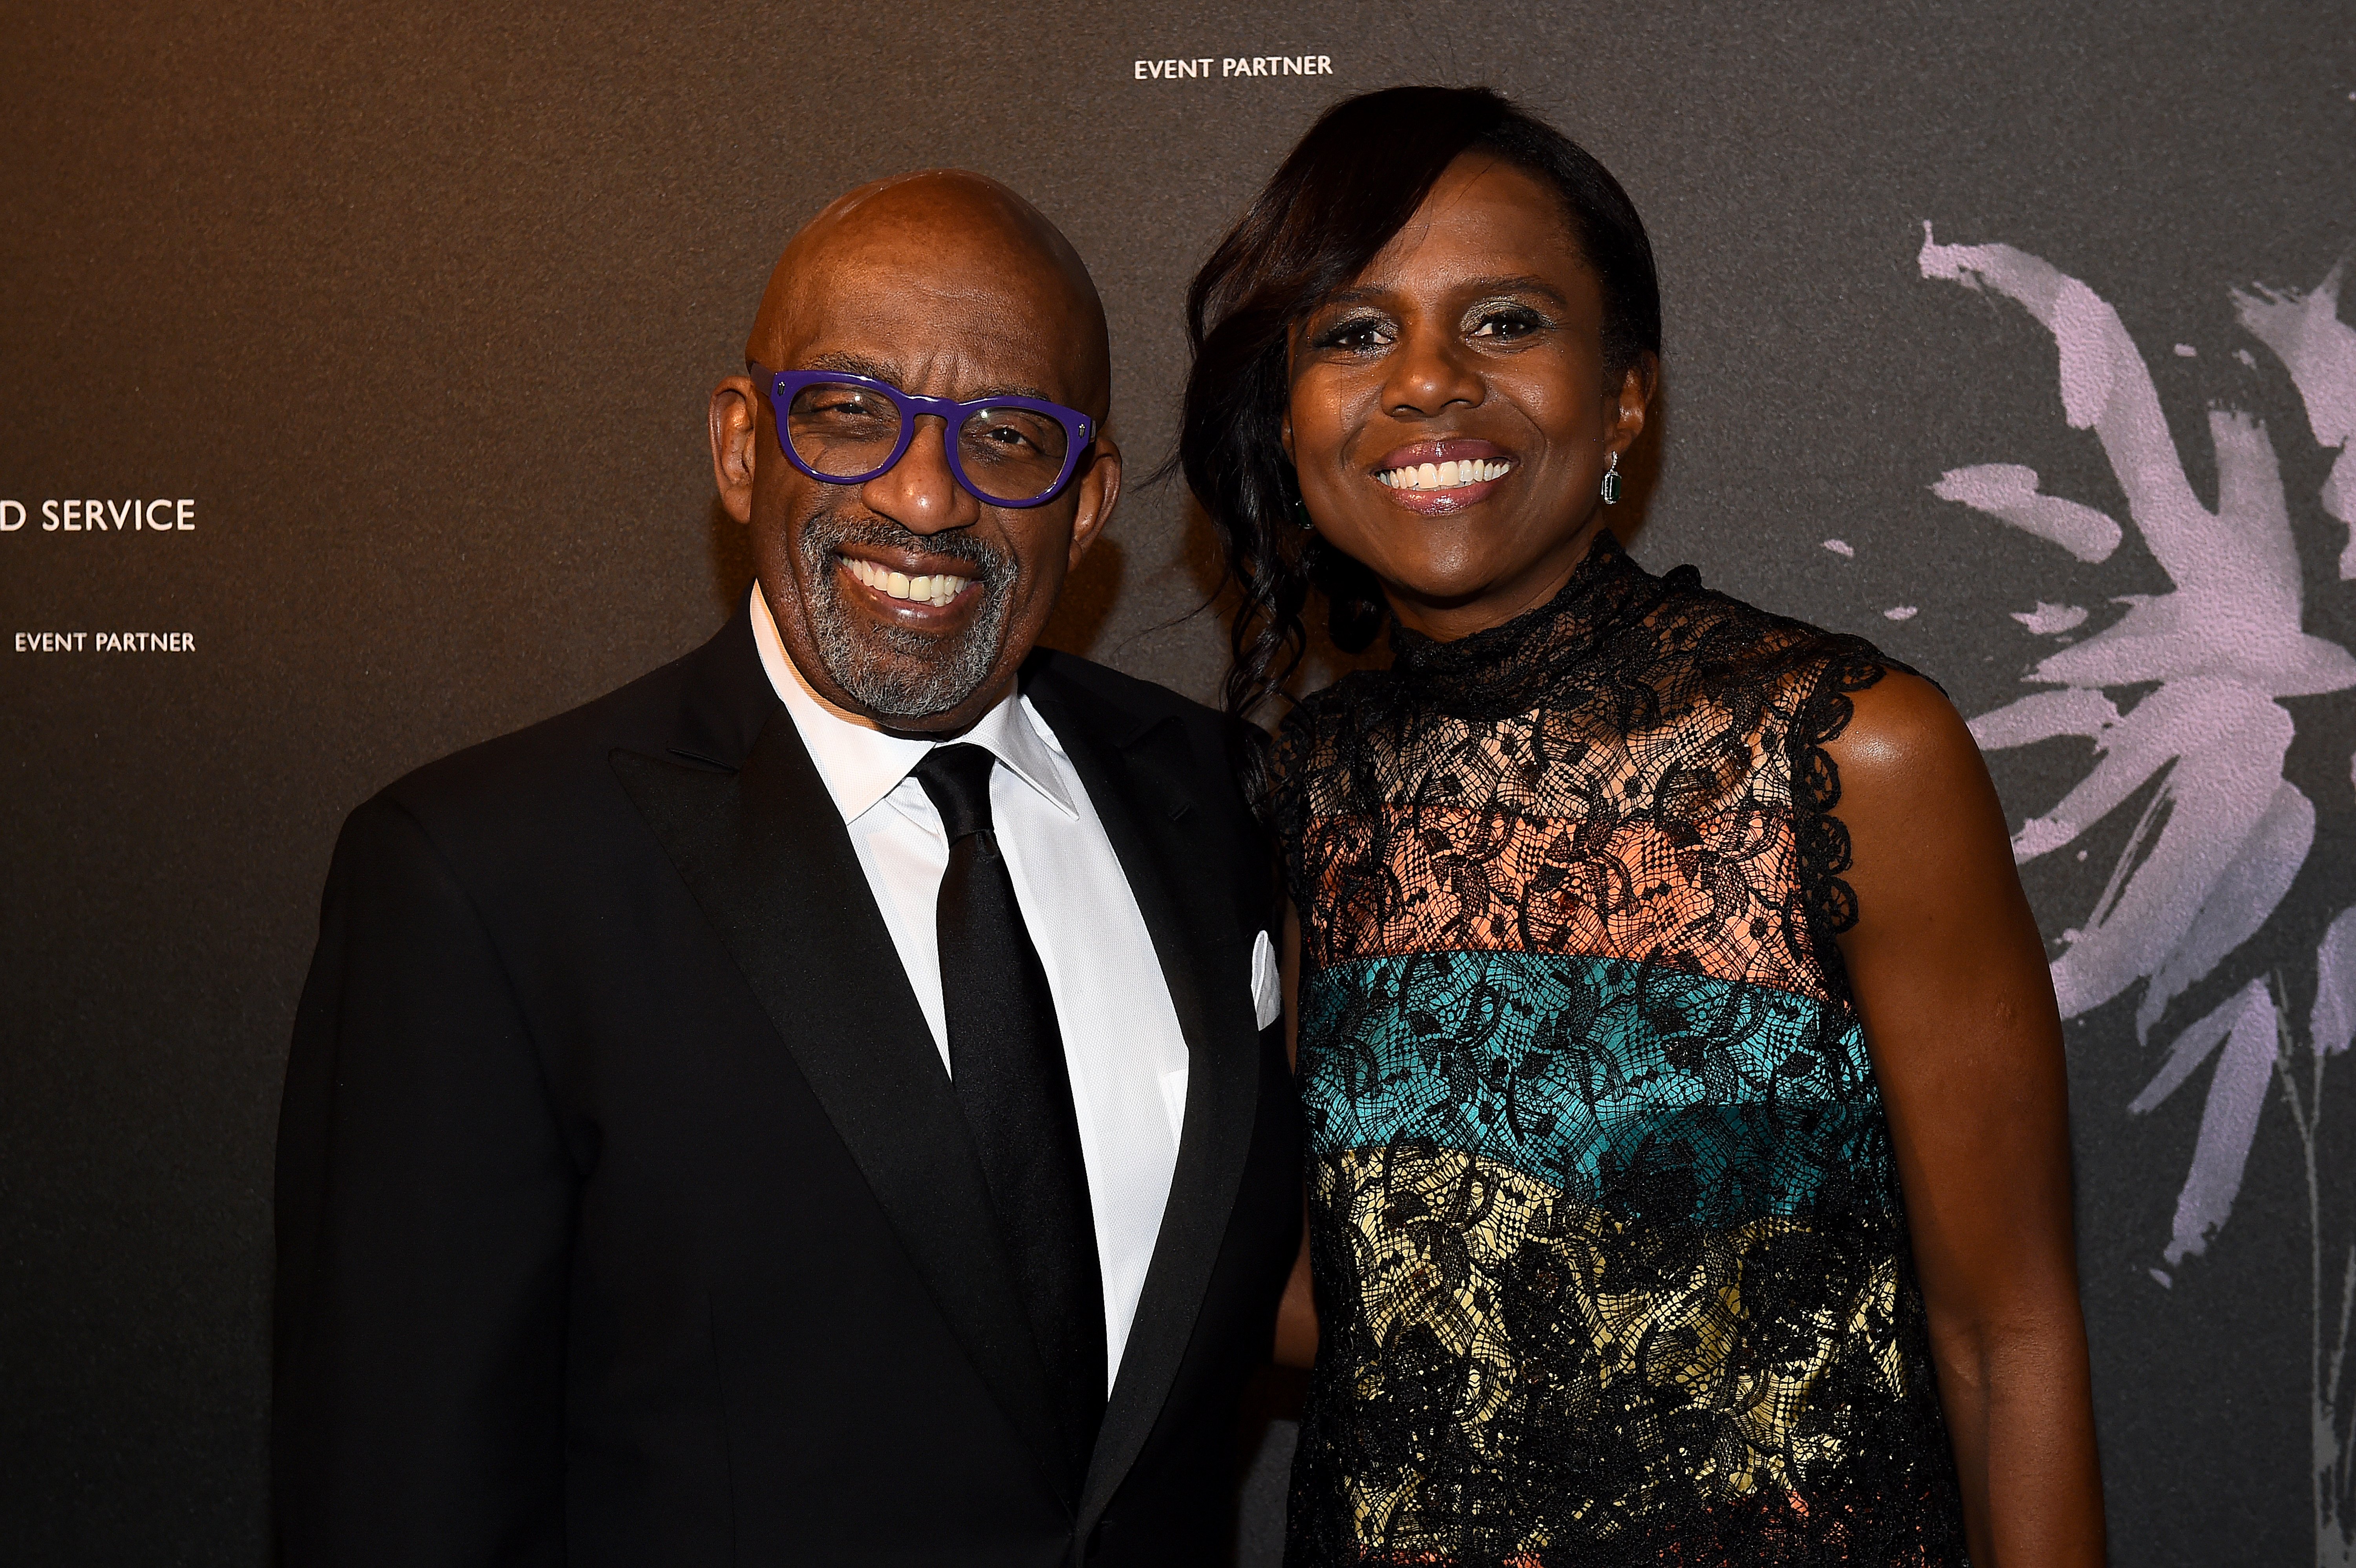 Al Roker and Deborah Roberts attend the Fourth Annual Berggruen Award Gala Celebrating 2019 Honoree Supreme Court Justice Ruth Bader Ginsburg in New York on December 16, 2019 in New York |  Source: Getty Images